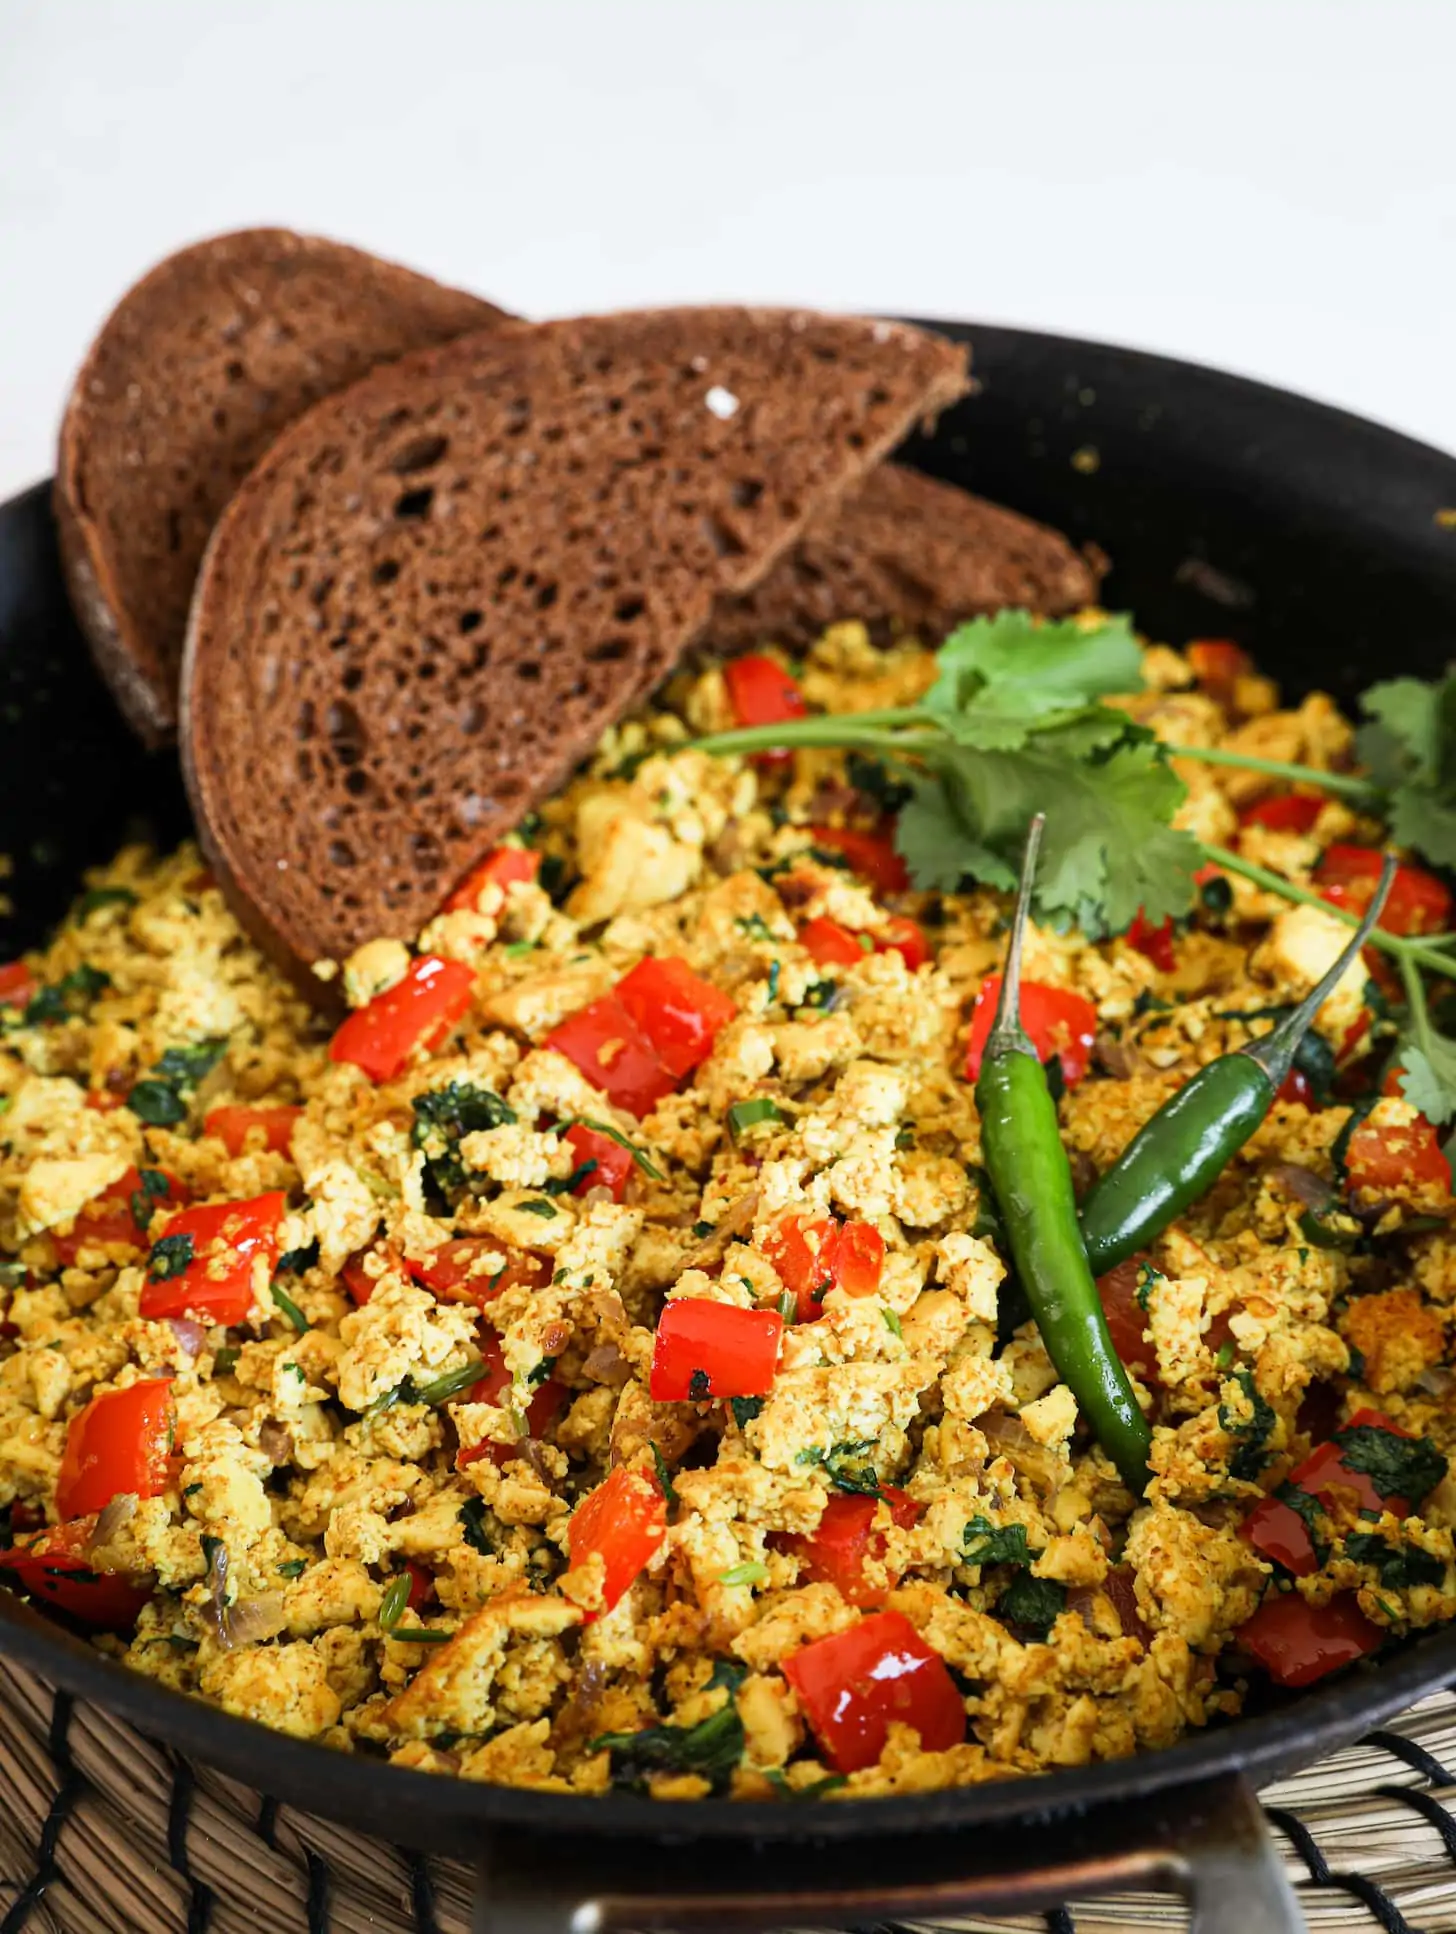 A close up image of a fry pan of scramble with red pepper cubes topped with cilantro and green chilli and two slices of pumpernickel bread placed on top.